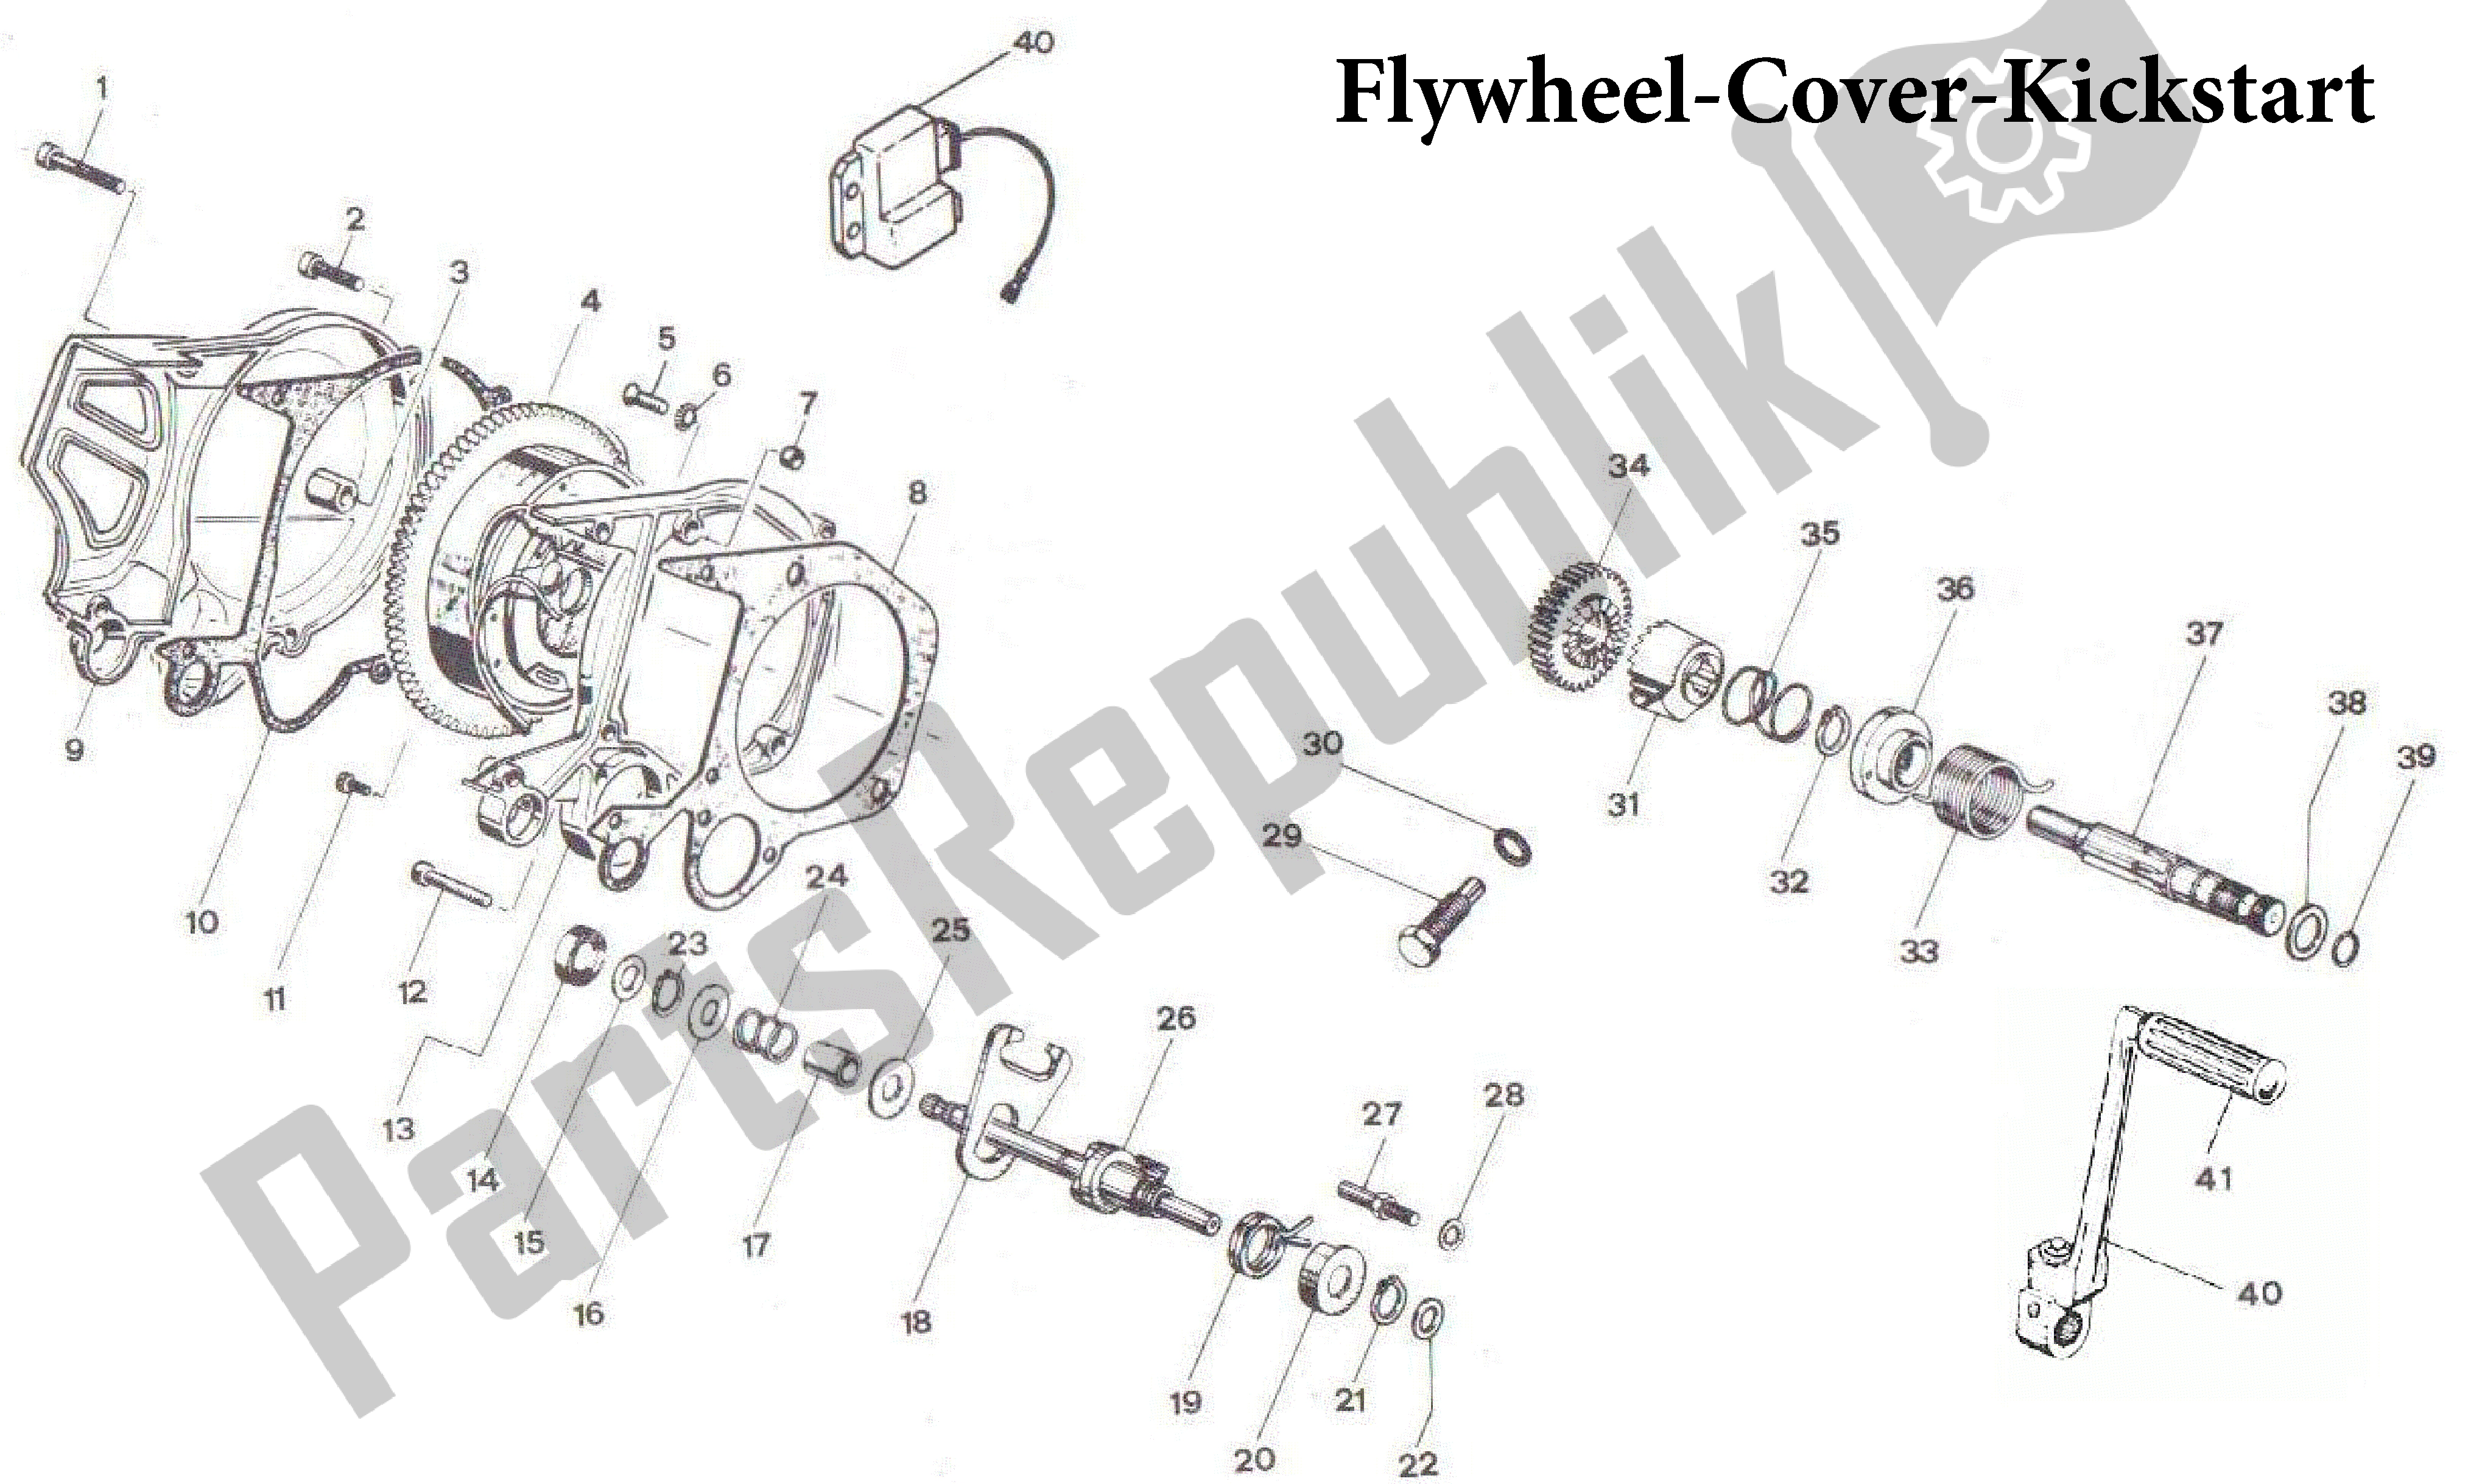 All parts for the Flywheel-cover-kickstart of the Aprilia RX 50 1991